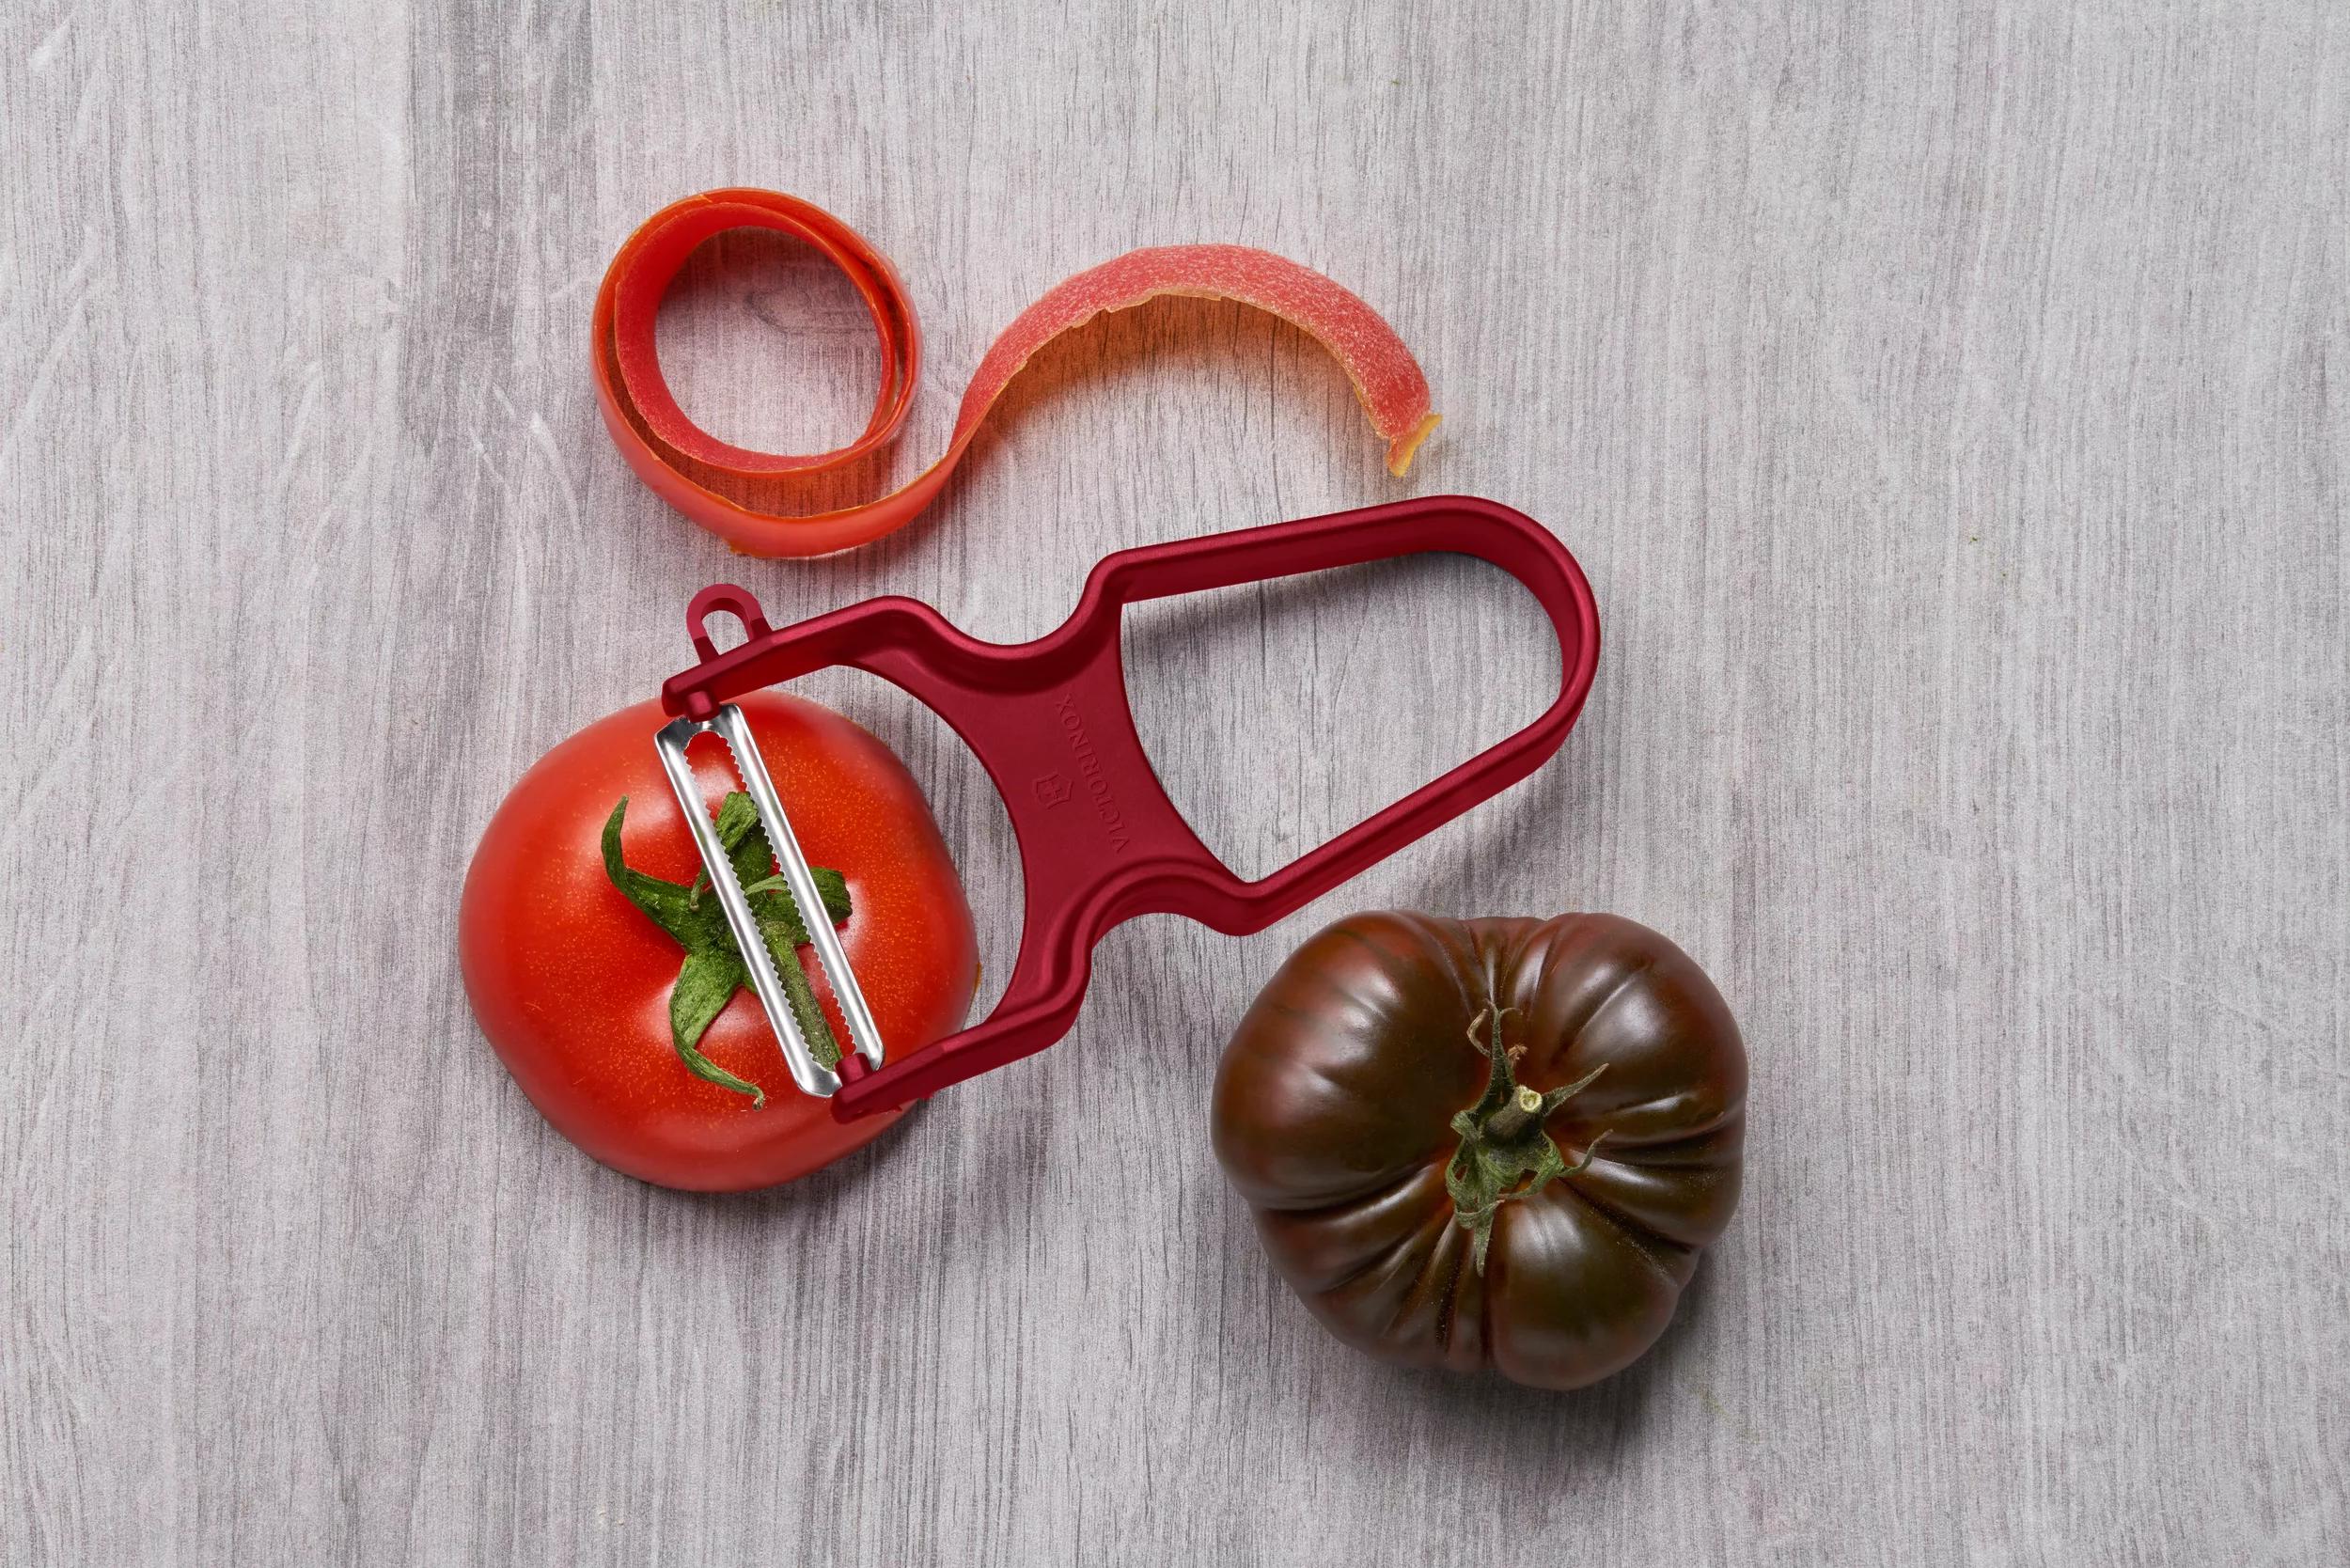 Yes, you can peel a tomato!